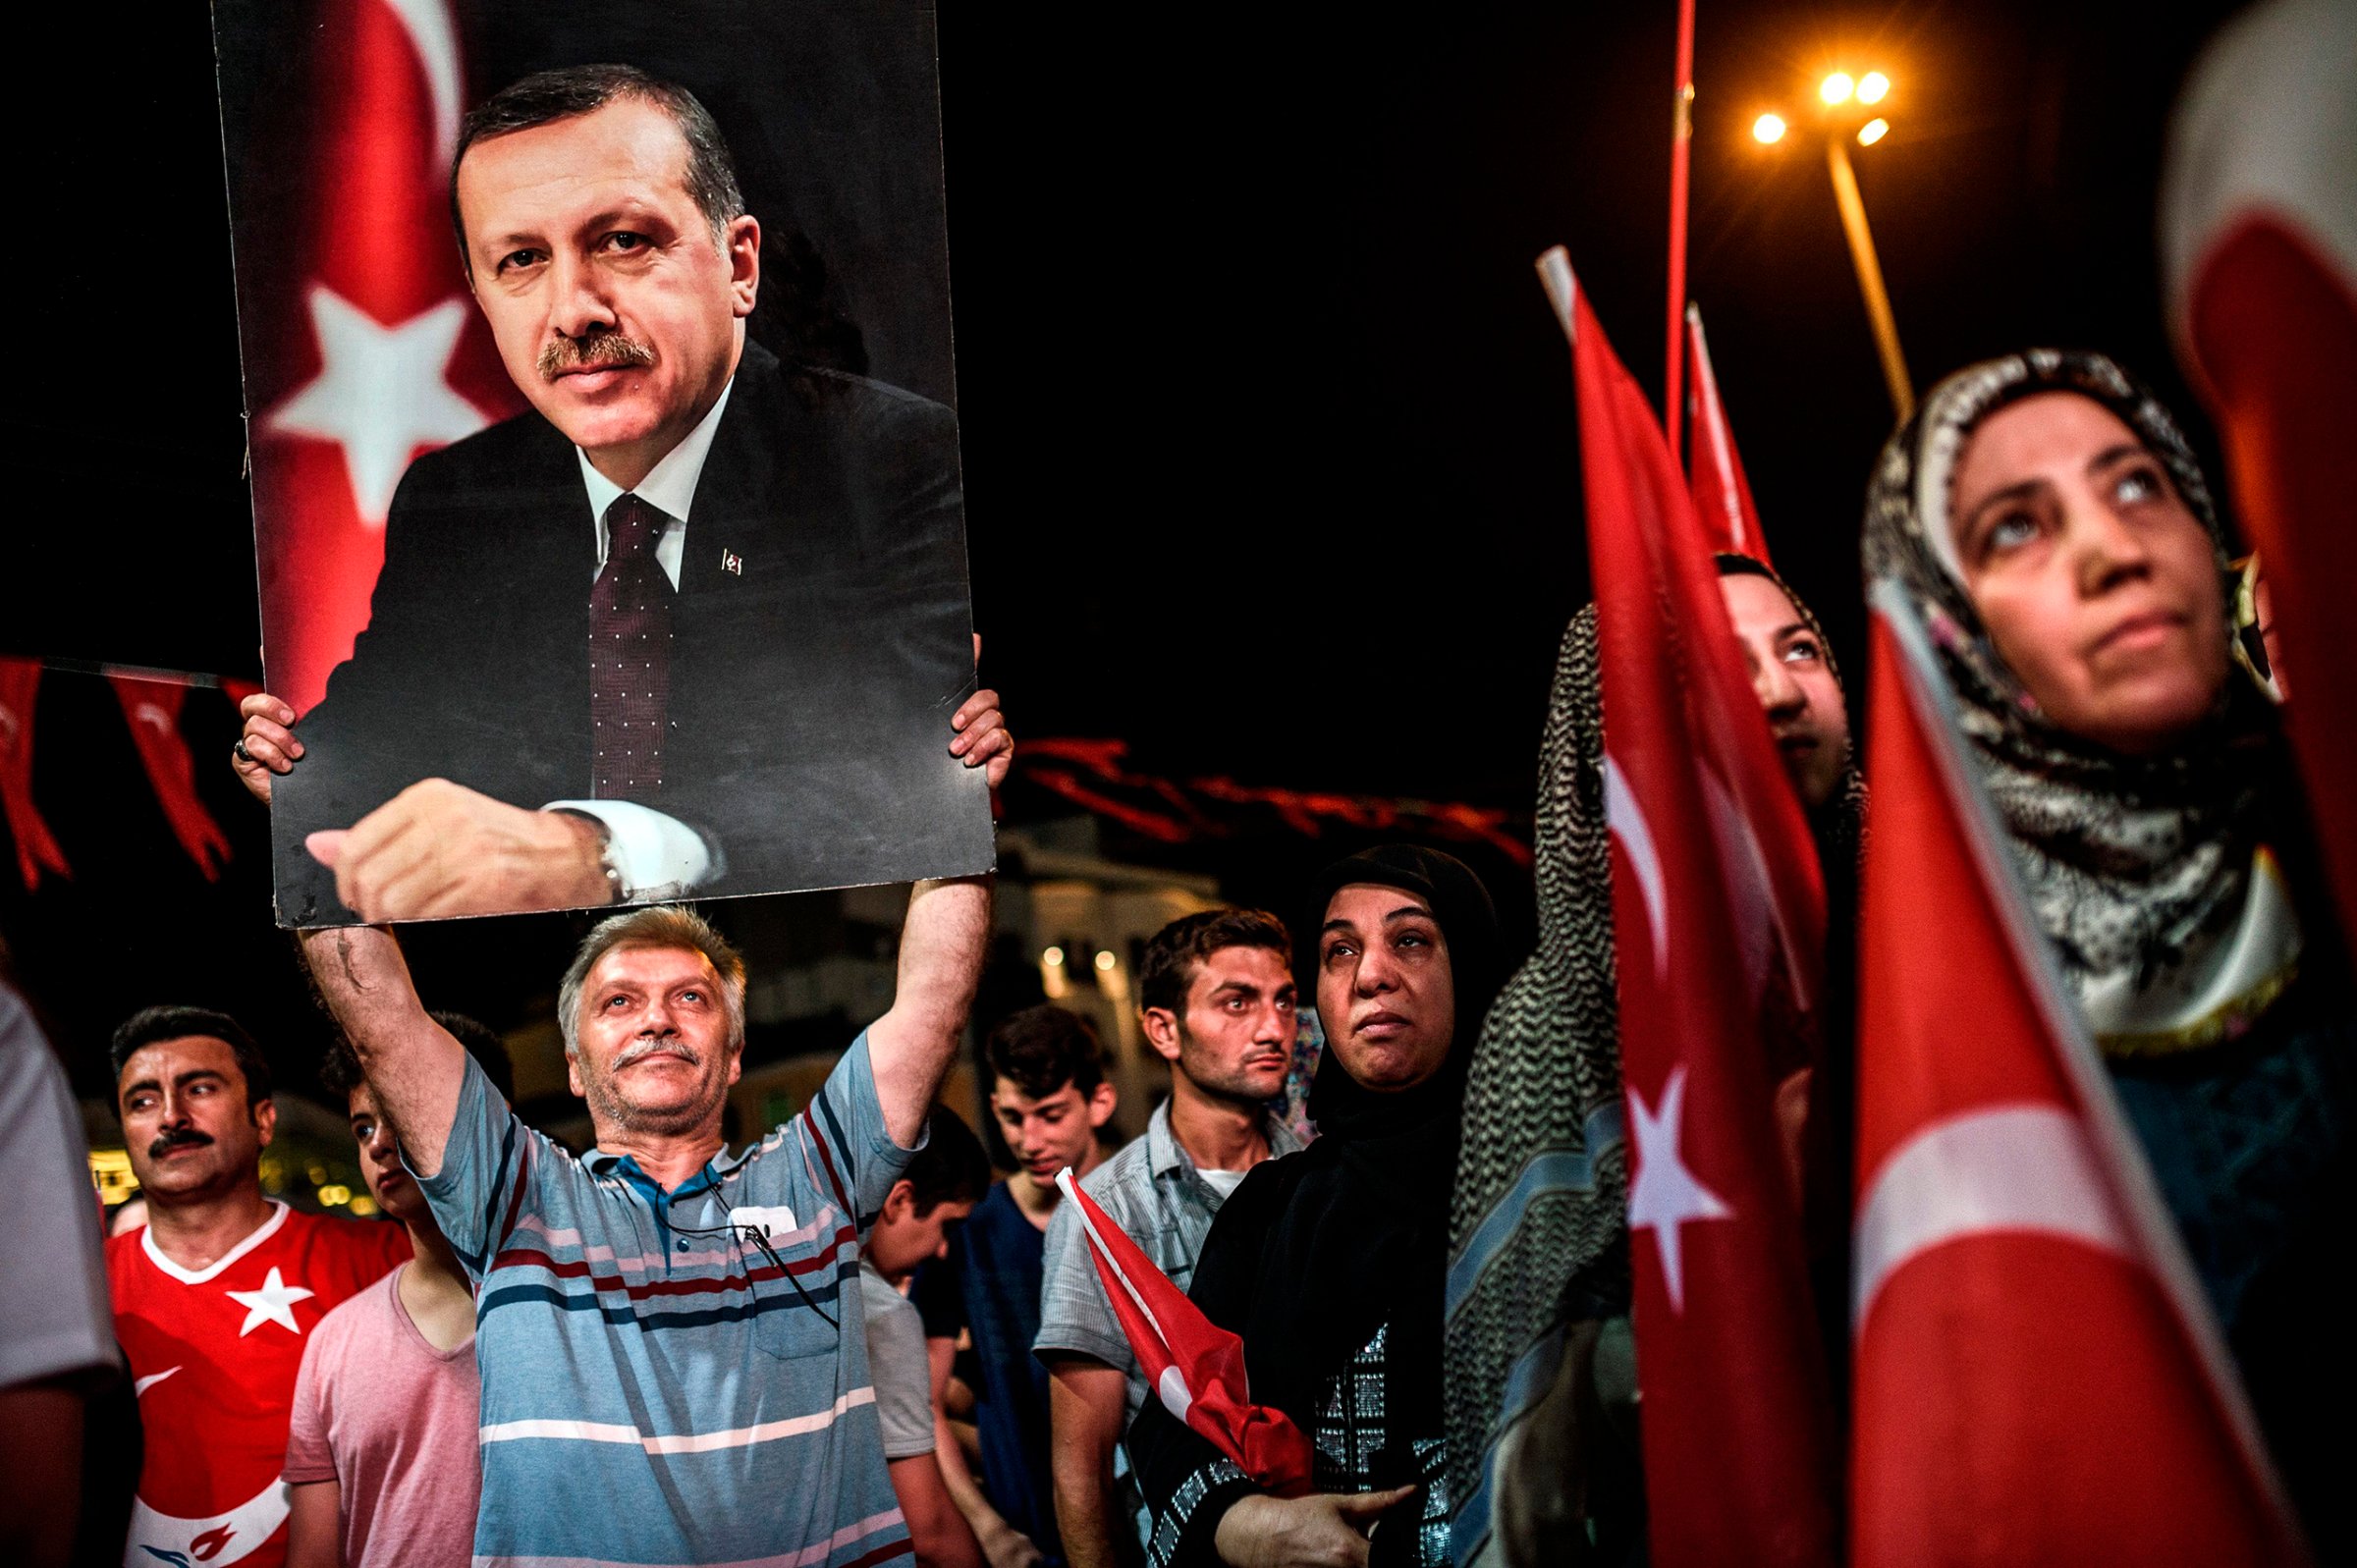 A man holds up a photo of Turkey's President Recep Tayyip Erdogan during a pro-Erdogan rally in Taksim Square in Istanbul on July 22, 2016.